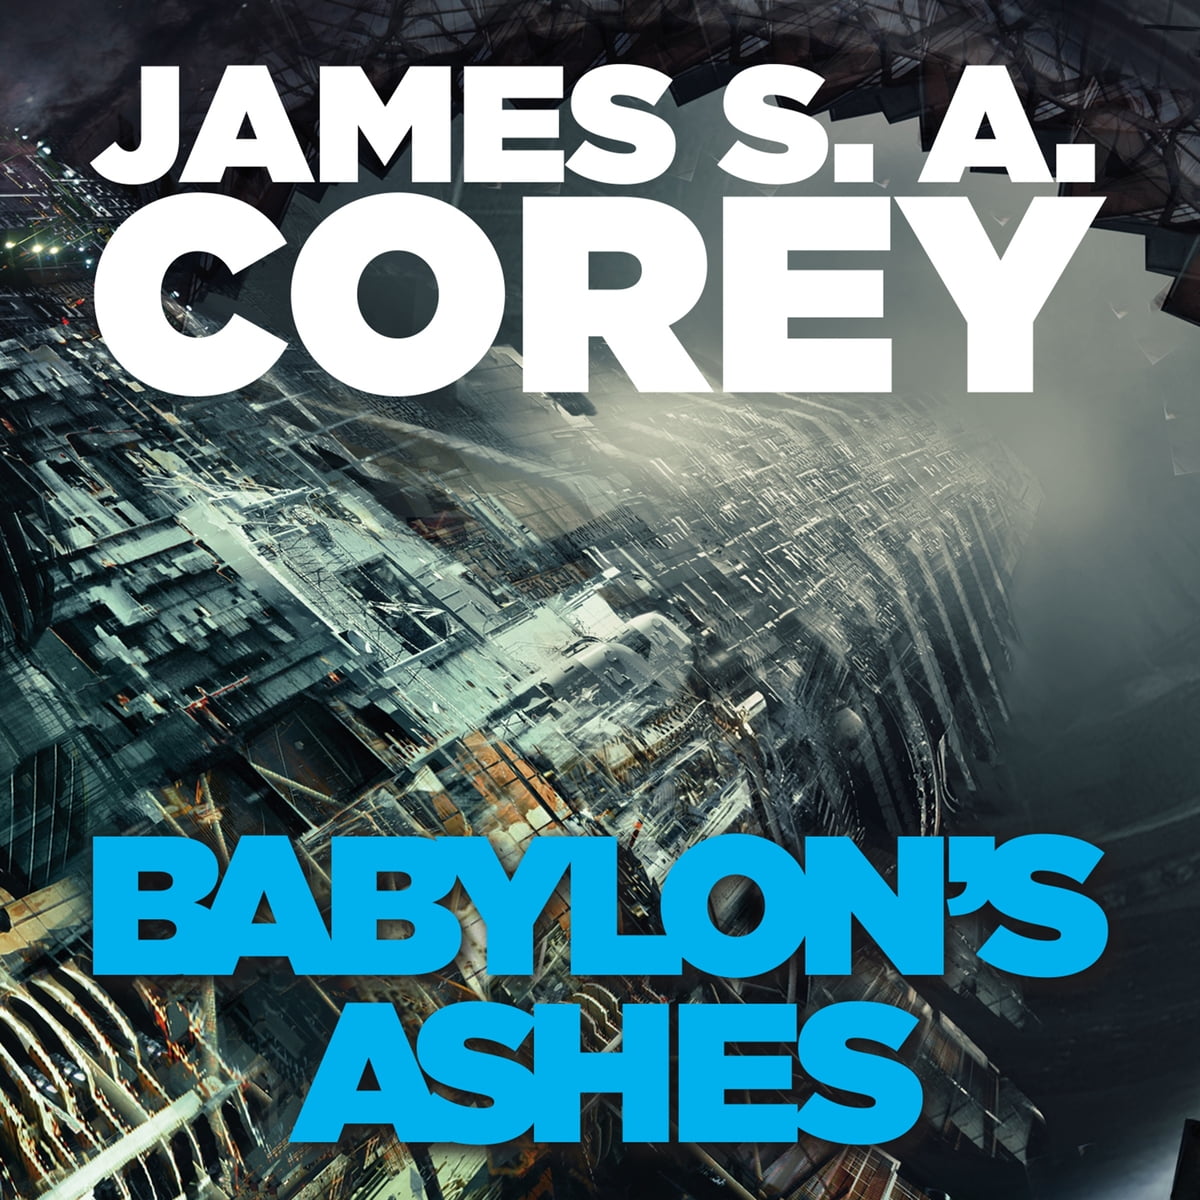 Babylon's Ashes by James S. A. Corey